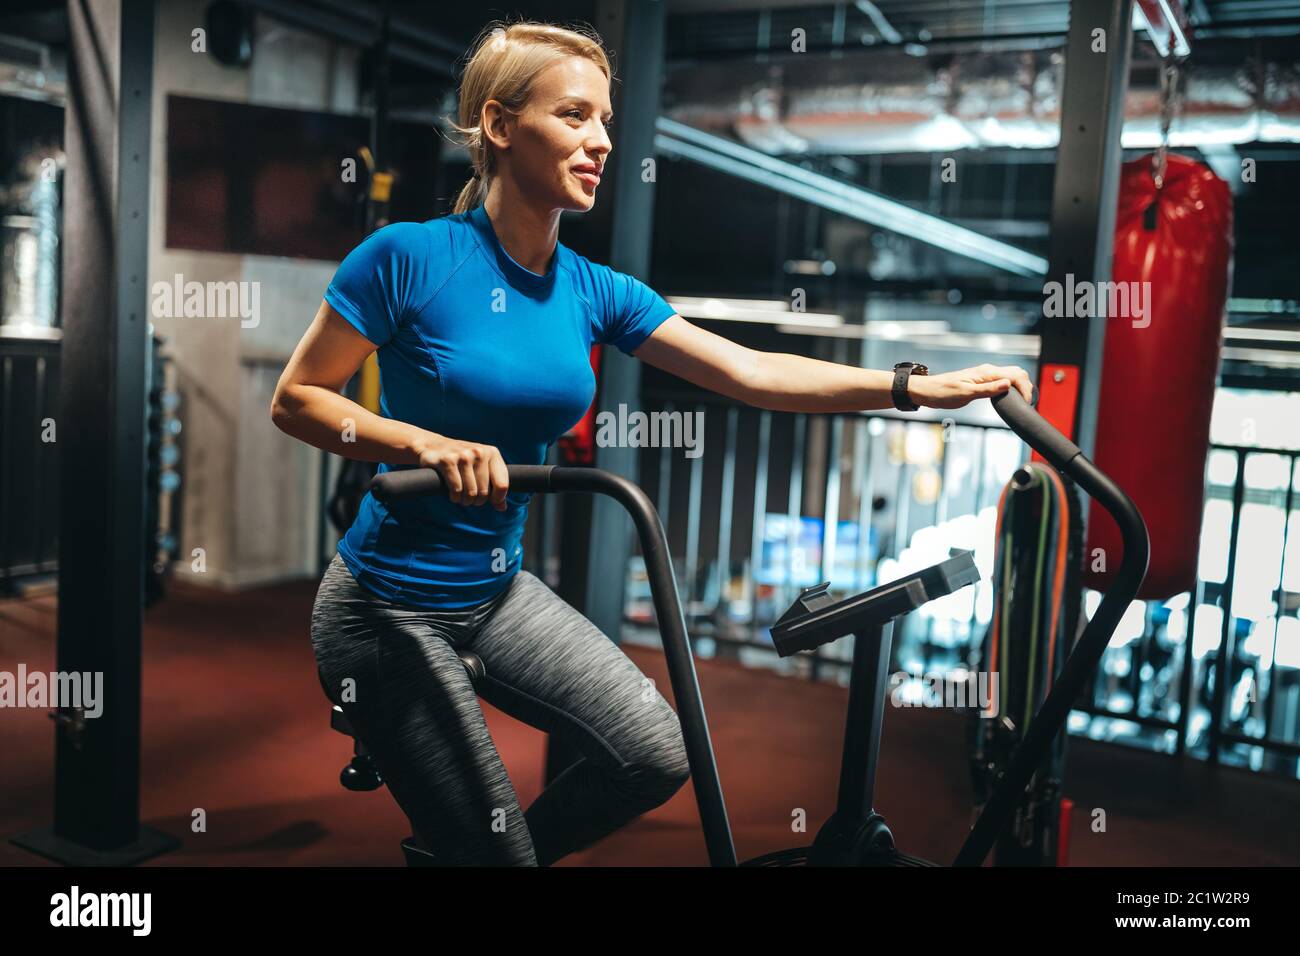 Fit woman working out on the exercise bike at the gym Stock Photo